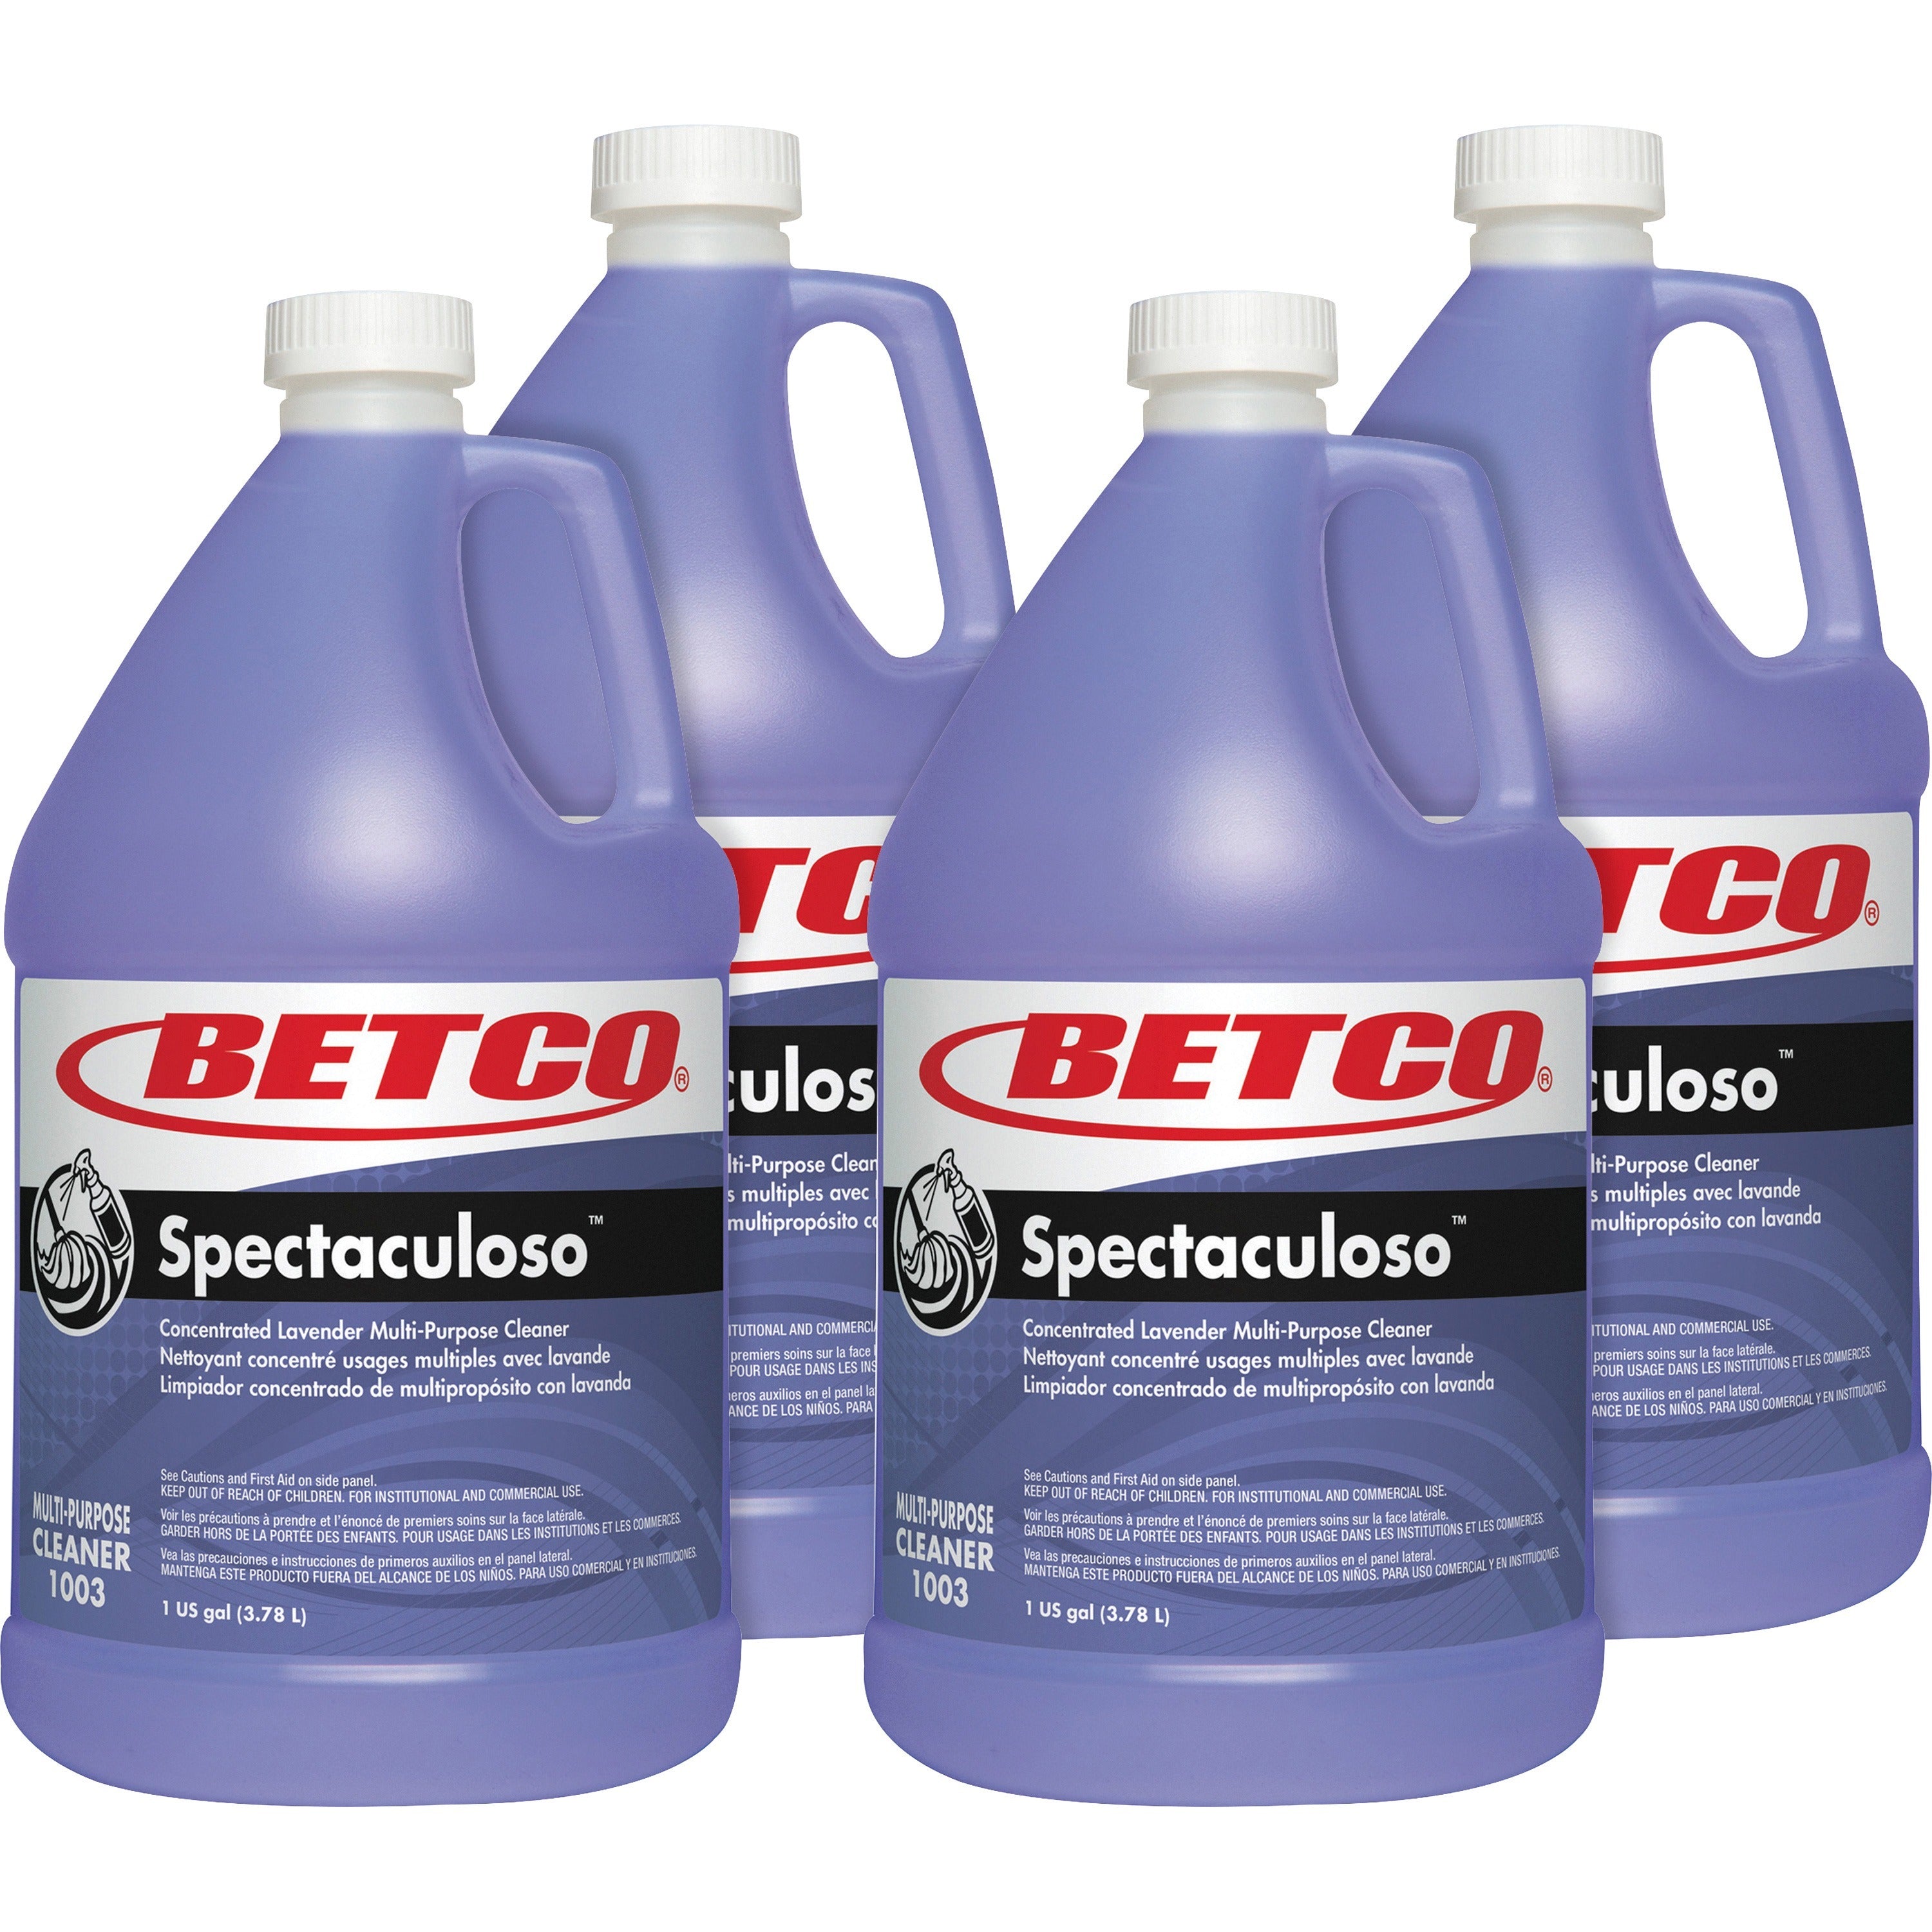 Betco Spectaculoso General Cleaner - Concentrate - 128 fl oz (4 quart) - 4 / Carton - Deodorize, Phosphate-free, Rinse-free, Butyl-free - Purple - 1